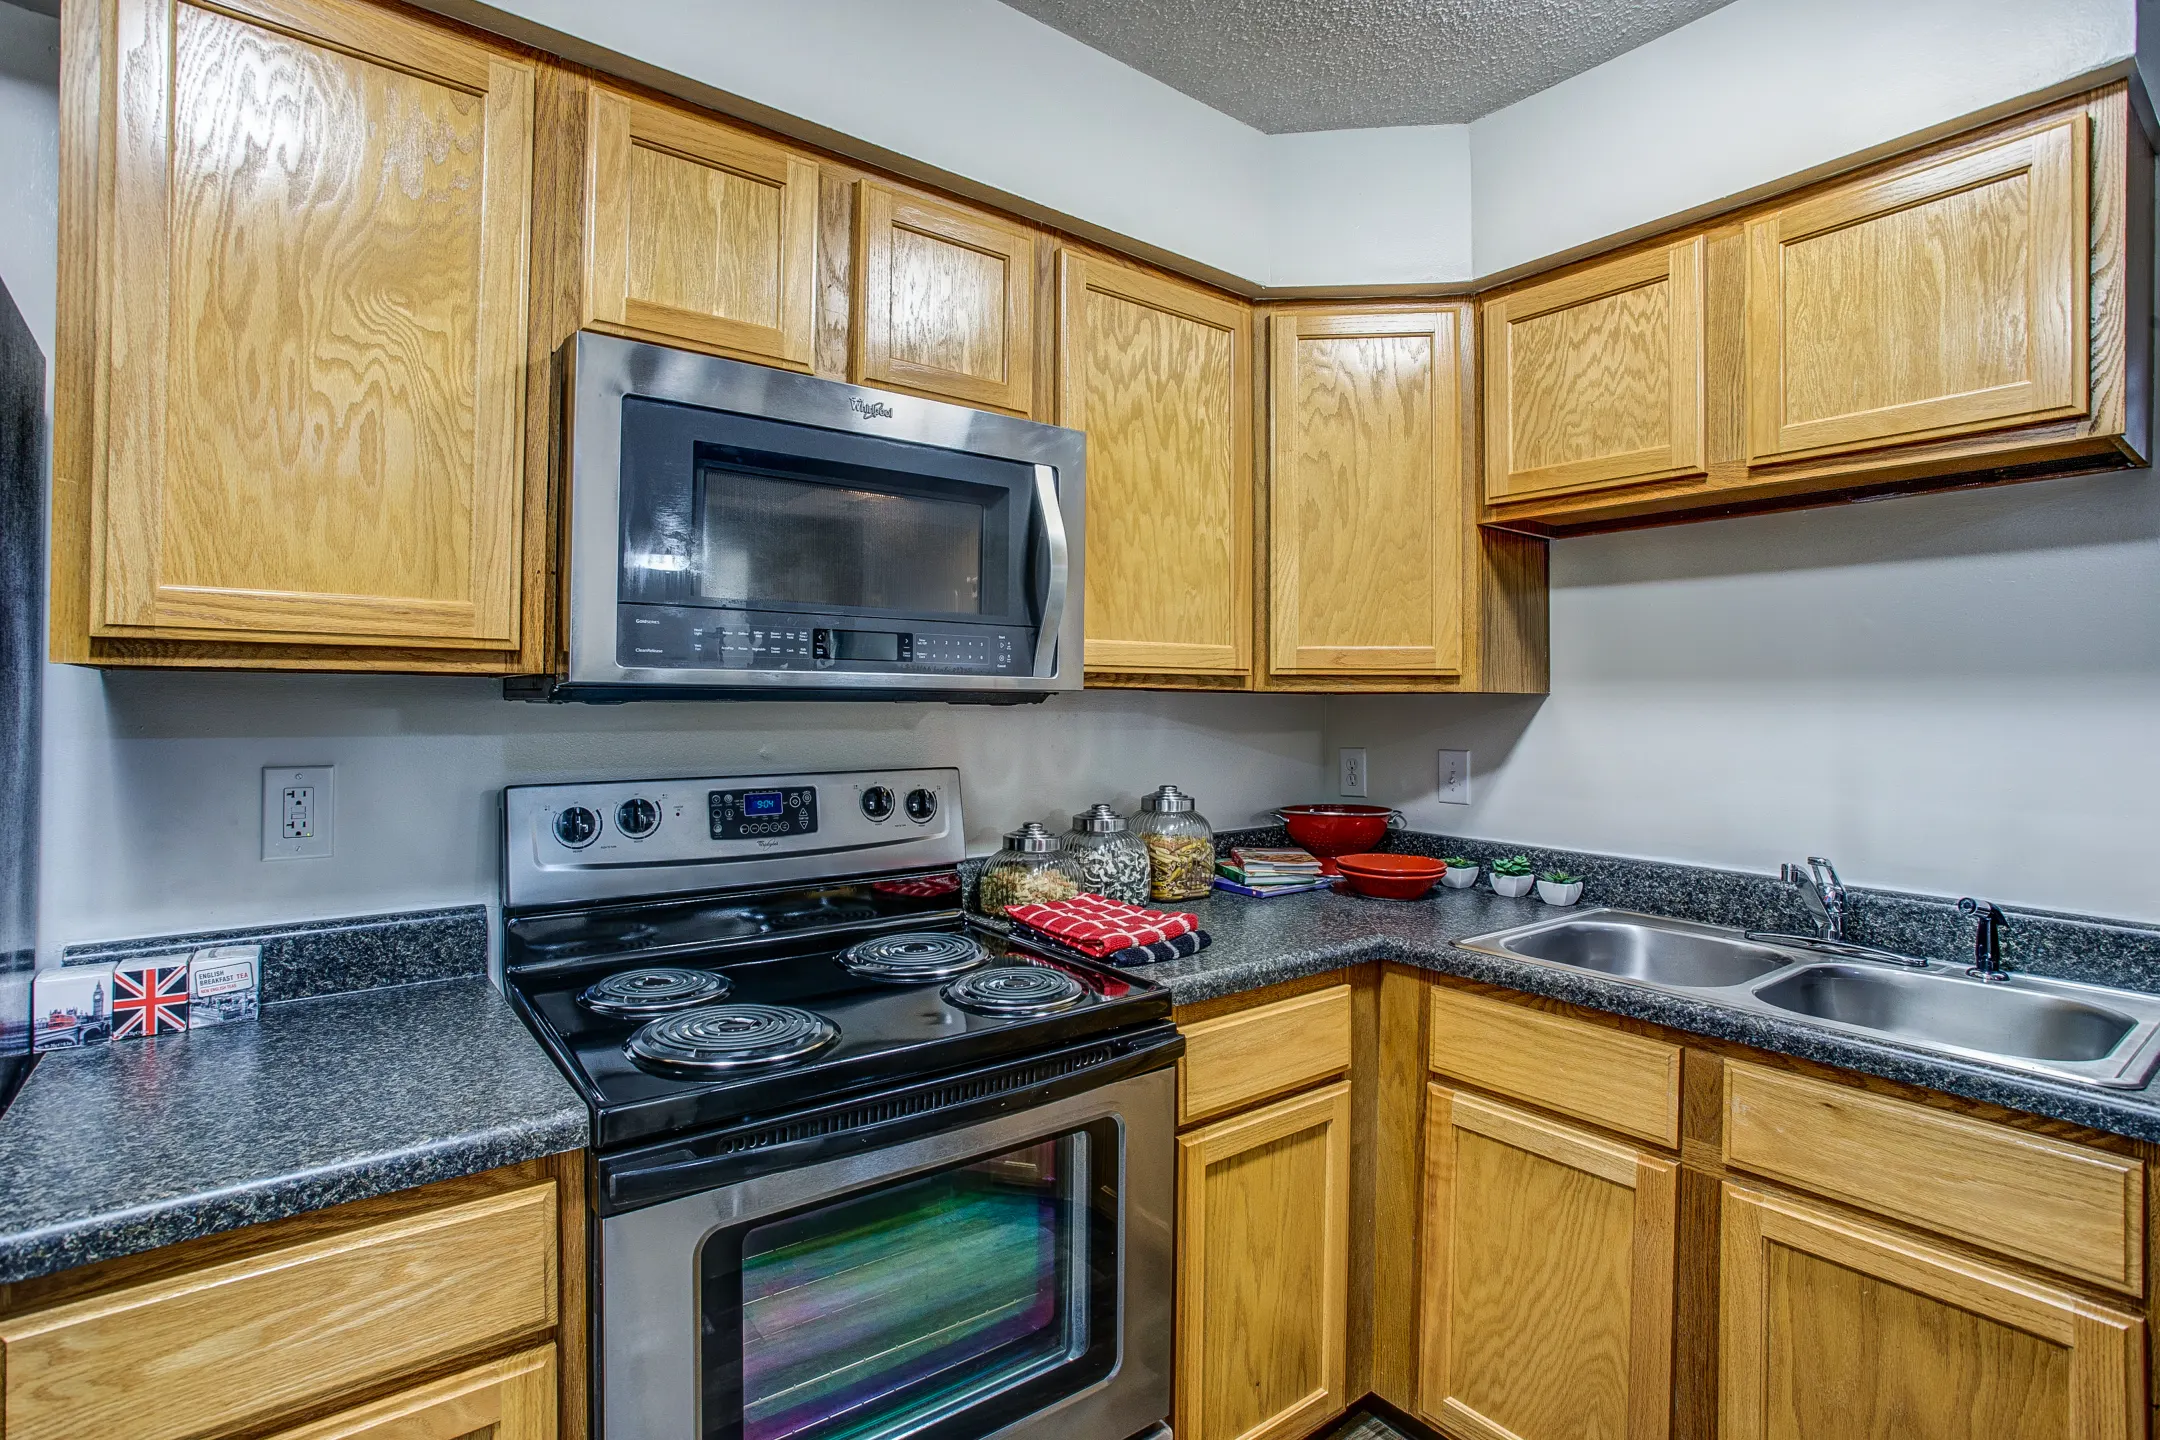 Kitchen - Baxter Crossings - Chesterfield, MO